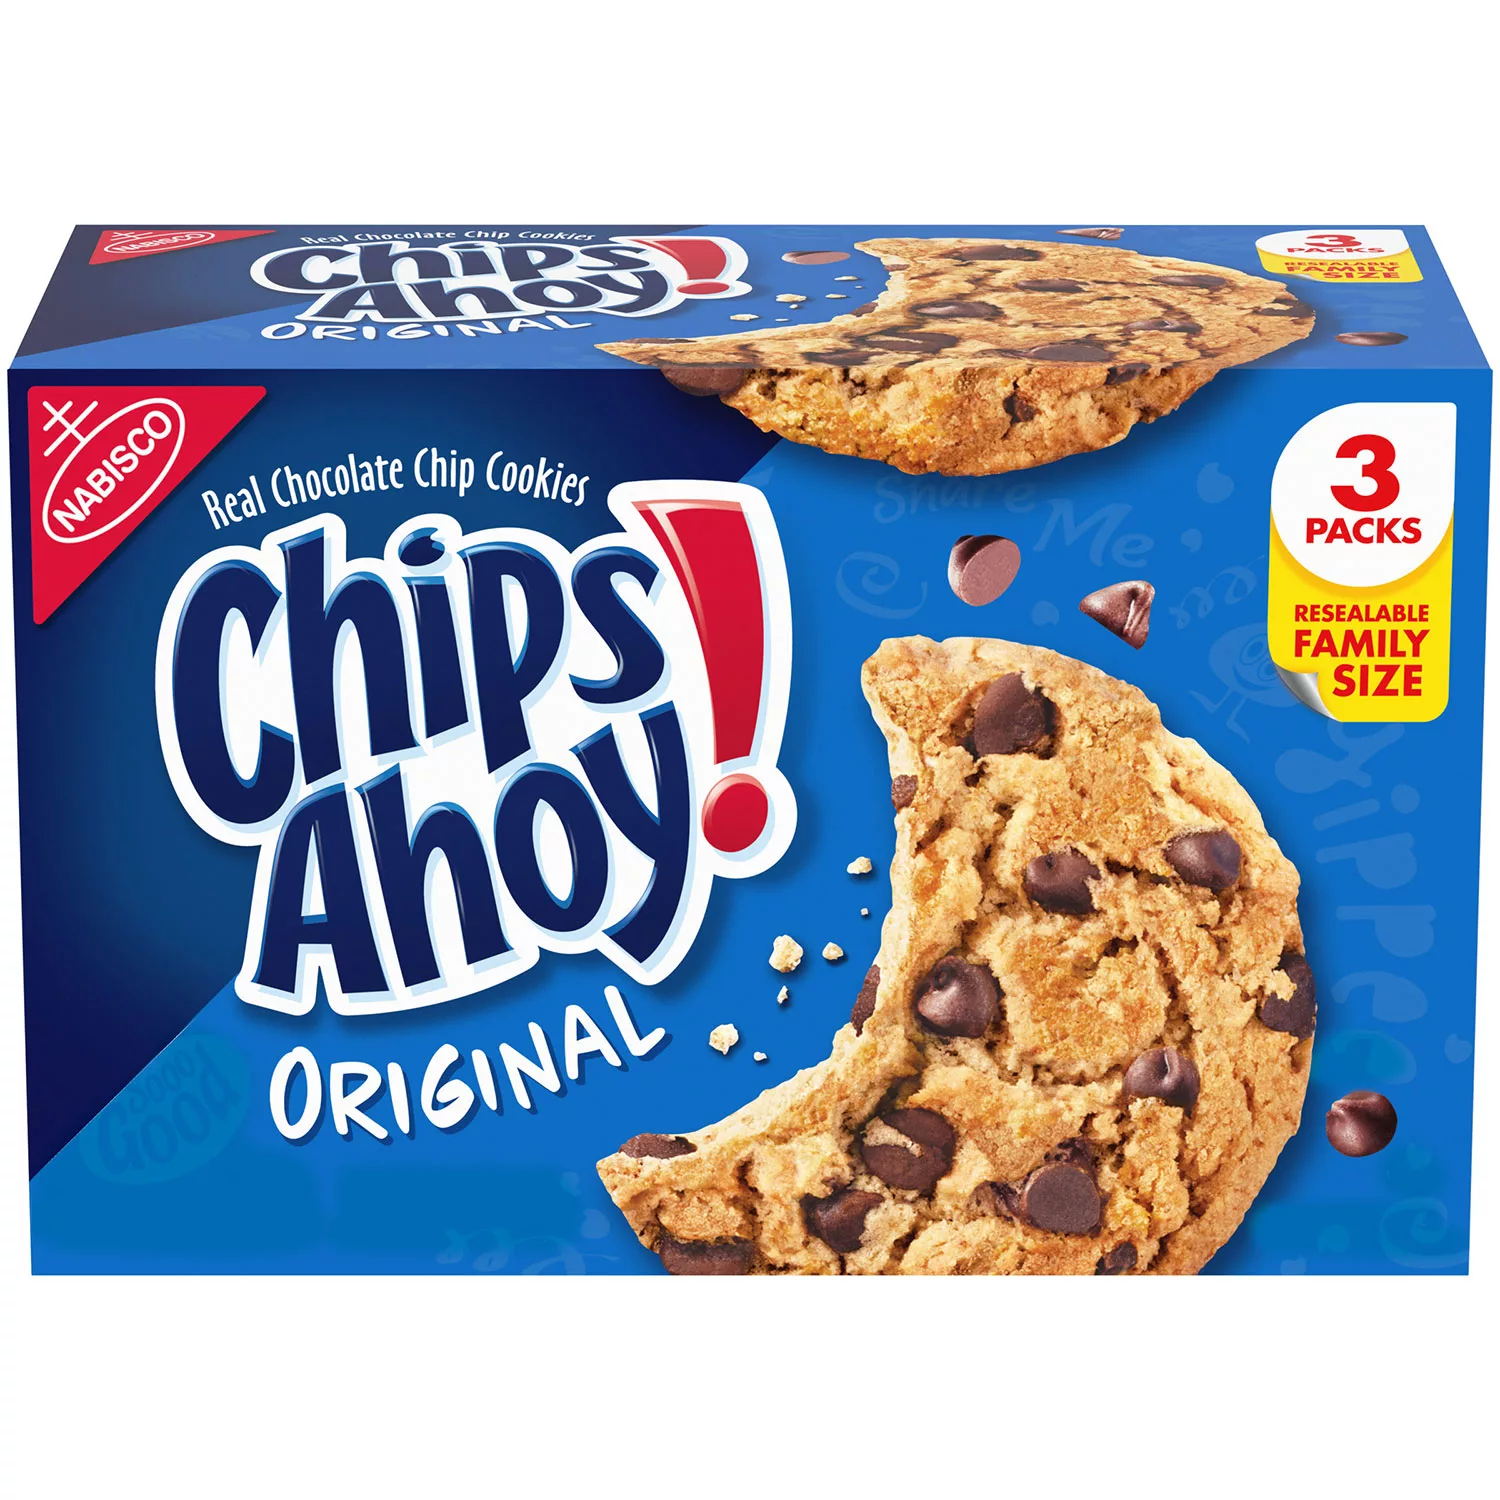 CHIPS AHOY Chocolate Chip Cookies (3 Family Size Packs)